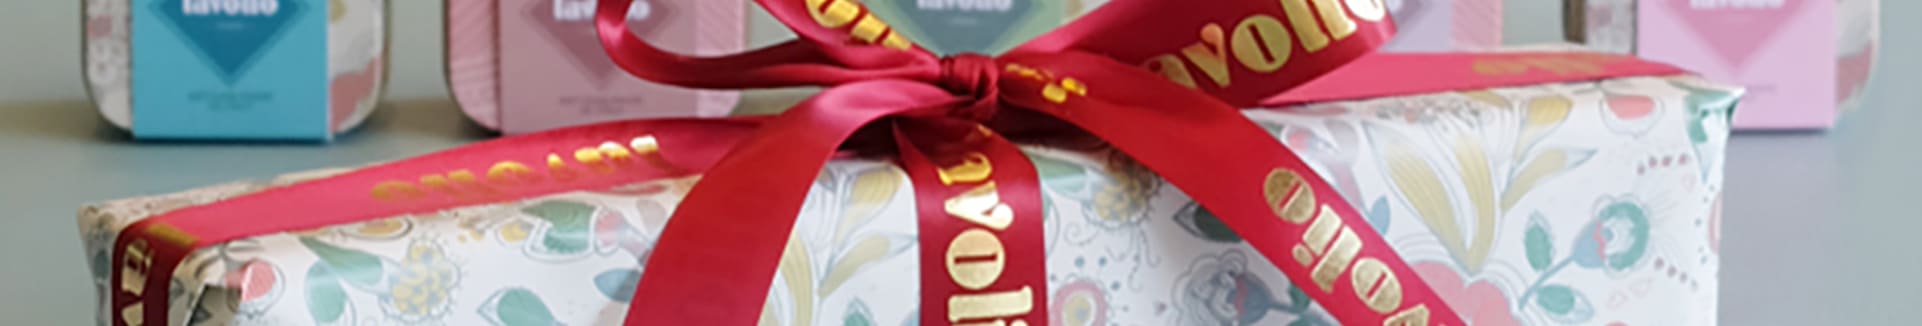 Lavolio boutique confectionary gift wrapping